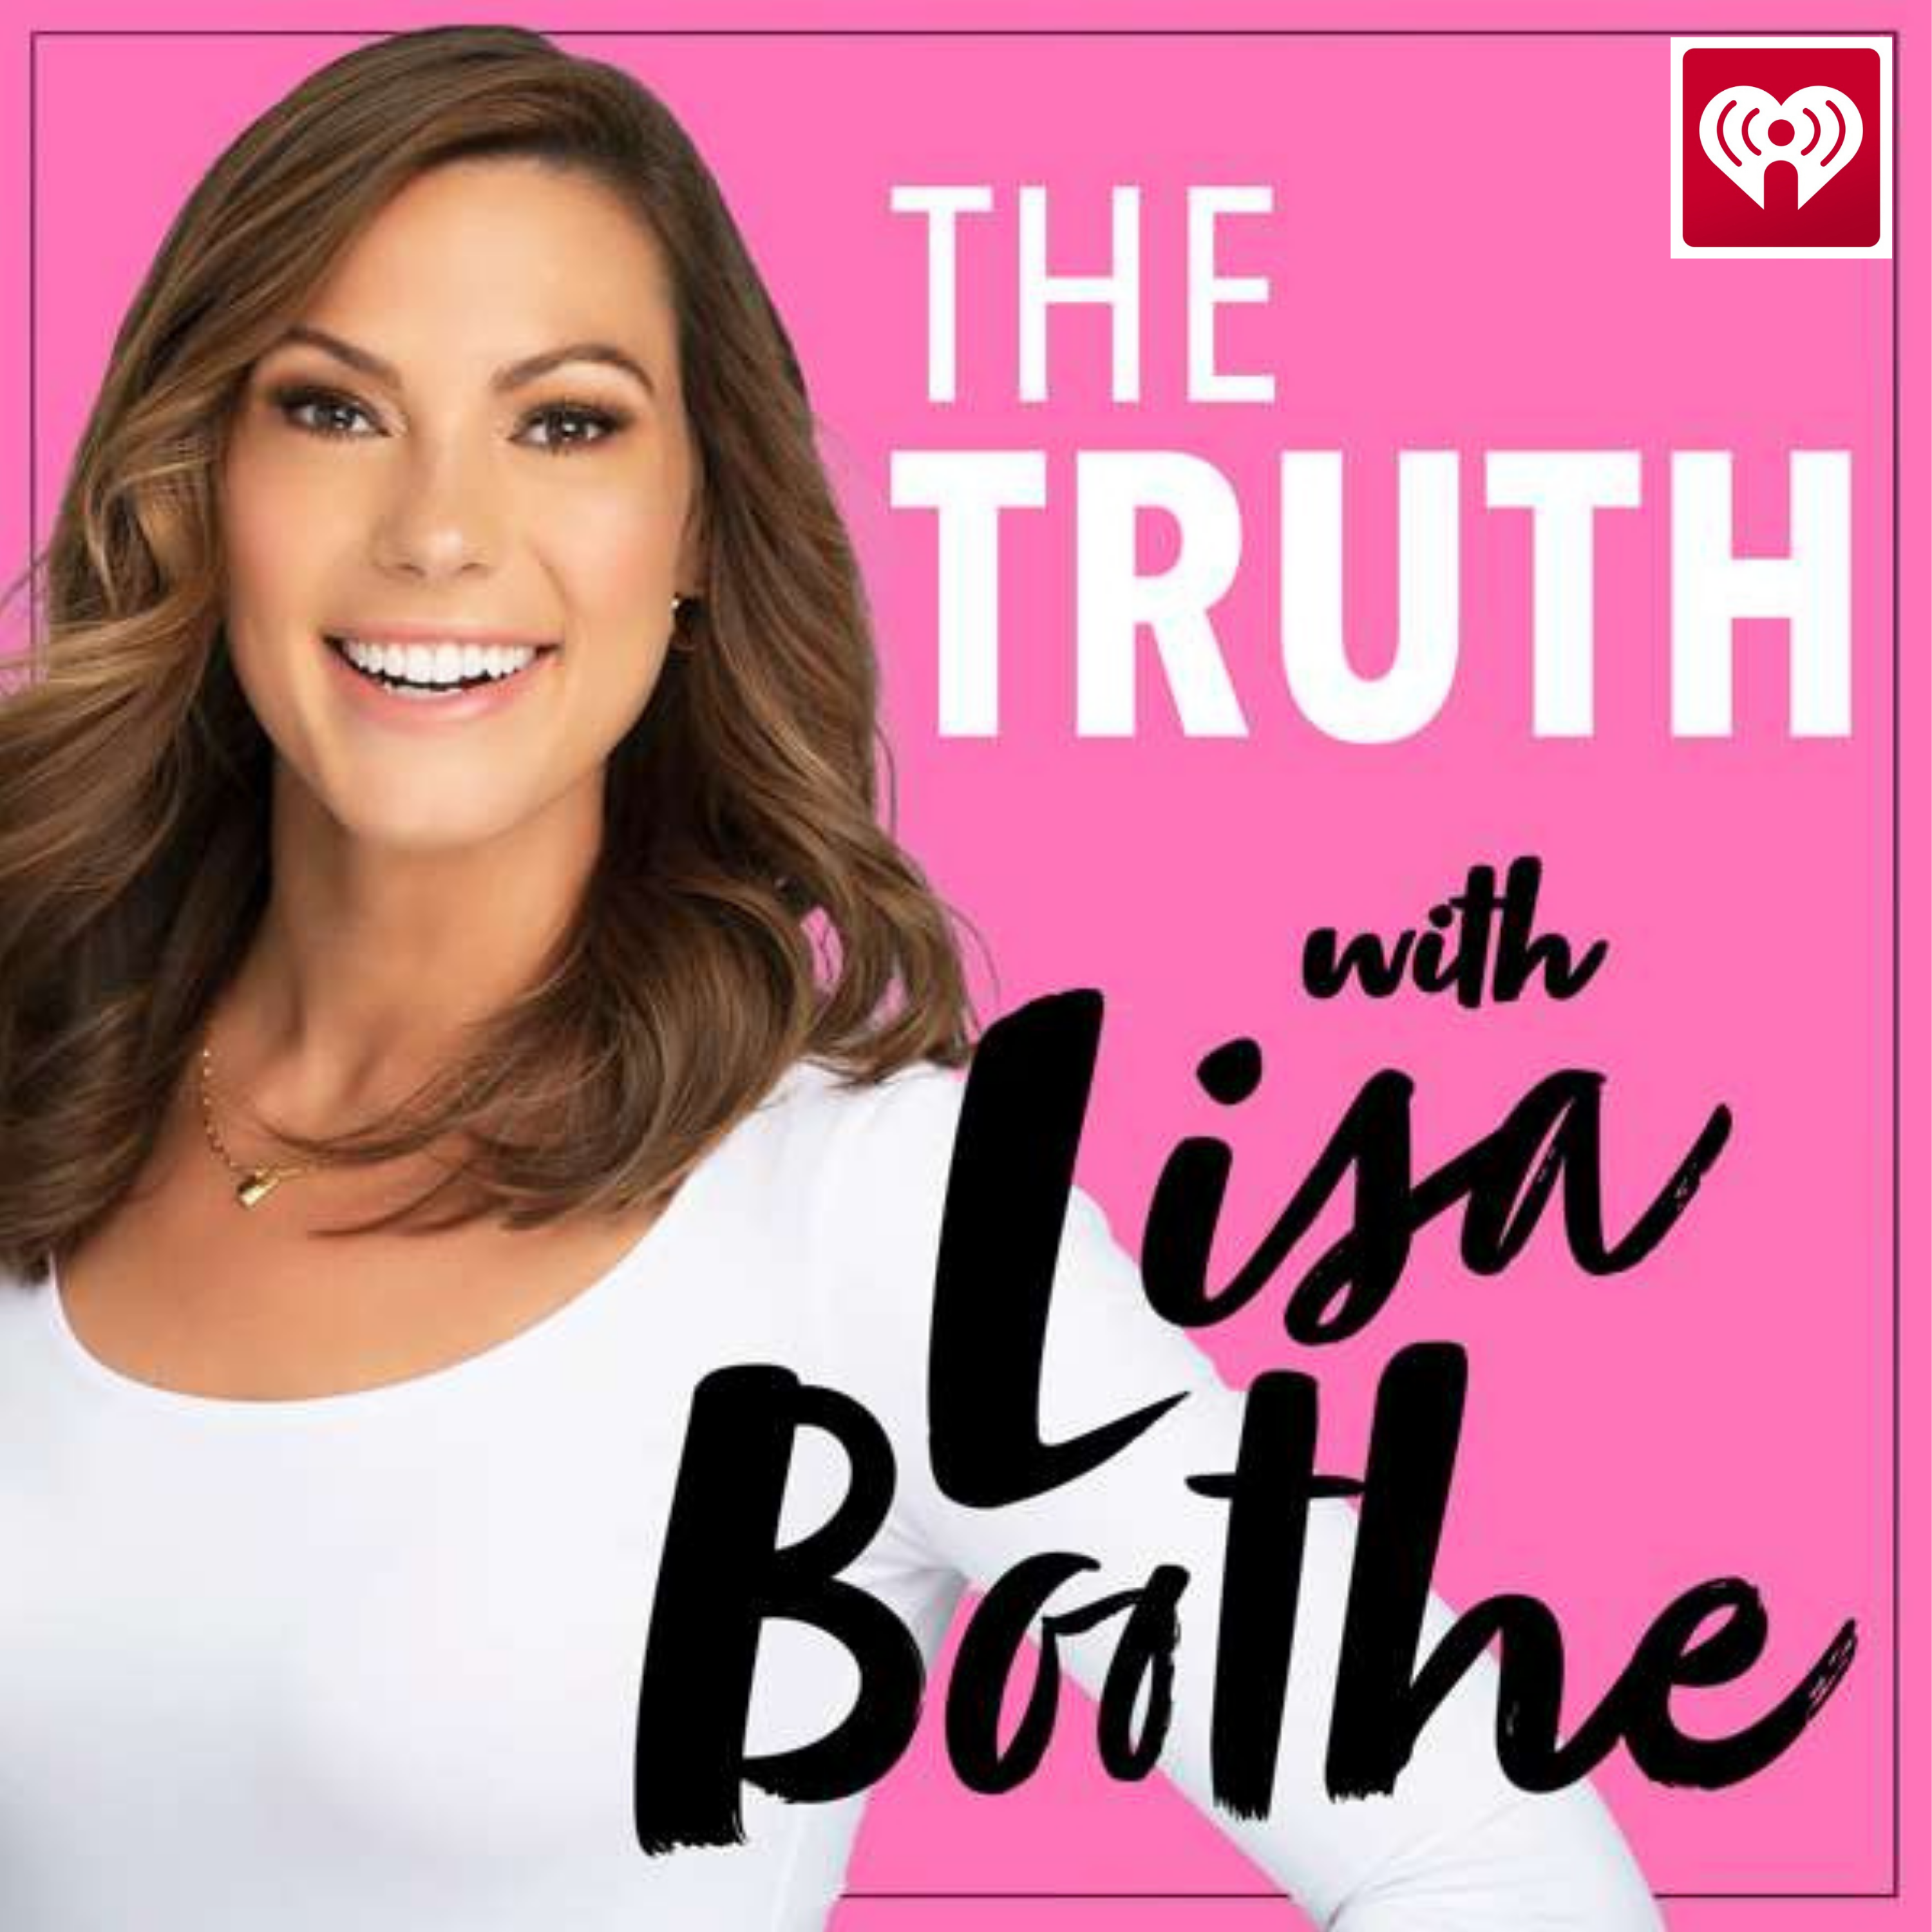 The Truth with Lisa Boothe: The Results of Gutting and Abolishing ICE